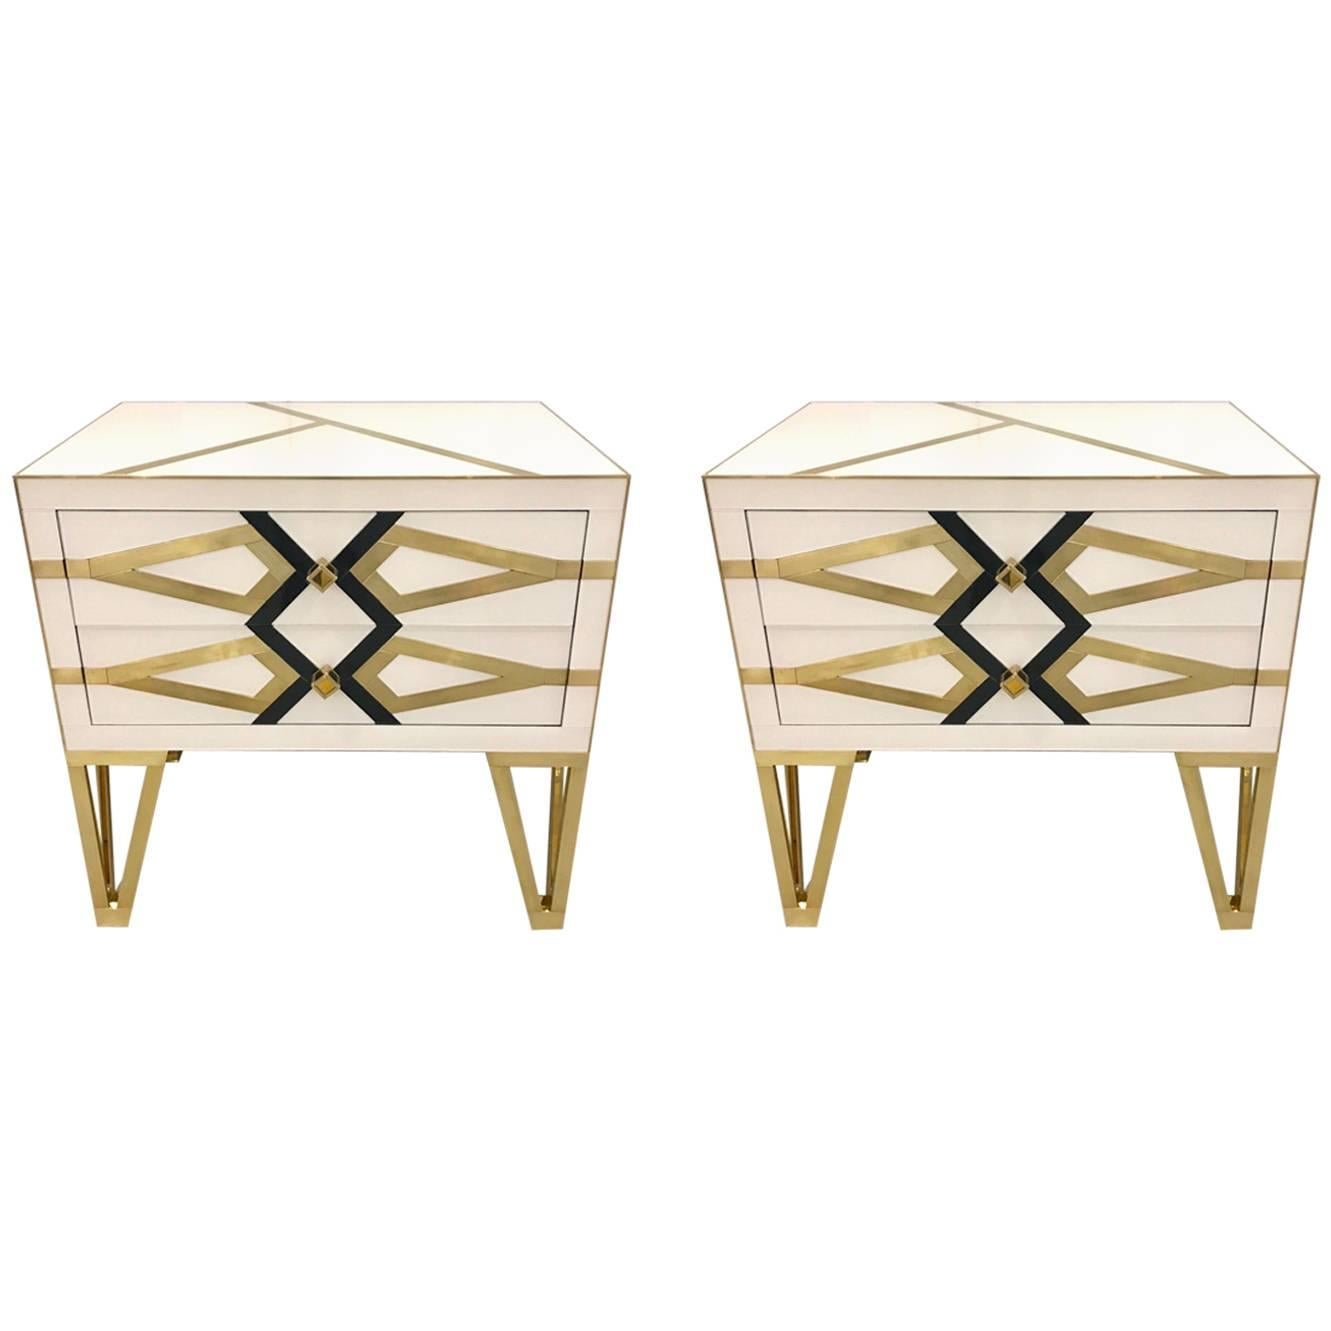 Bespoke Cosulich Creation Pair Gold Brass Black & White Side Tables/Nightstands